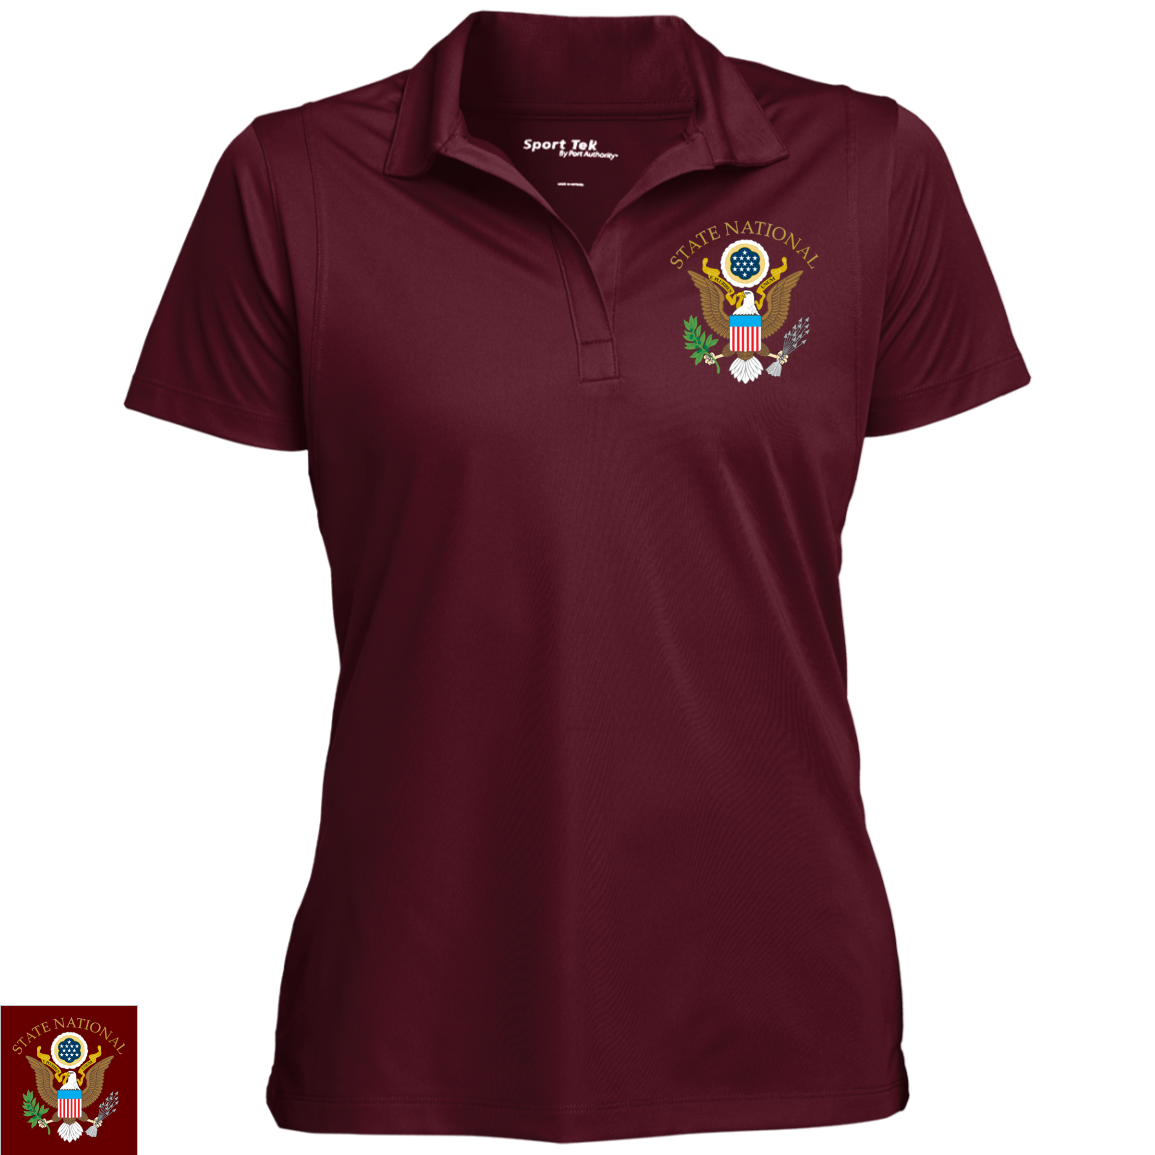 State National Ladies' Polo